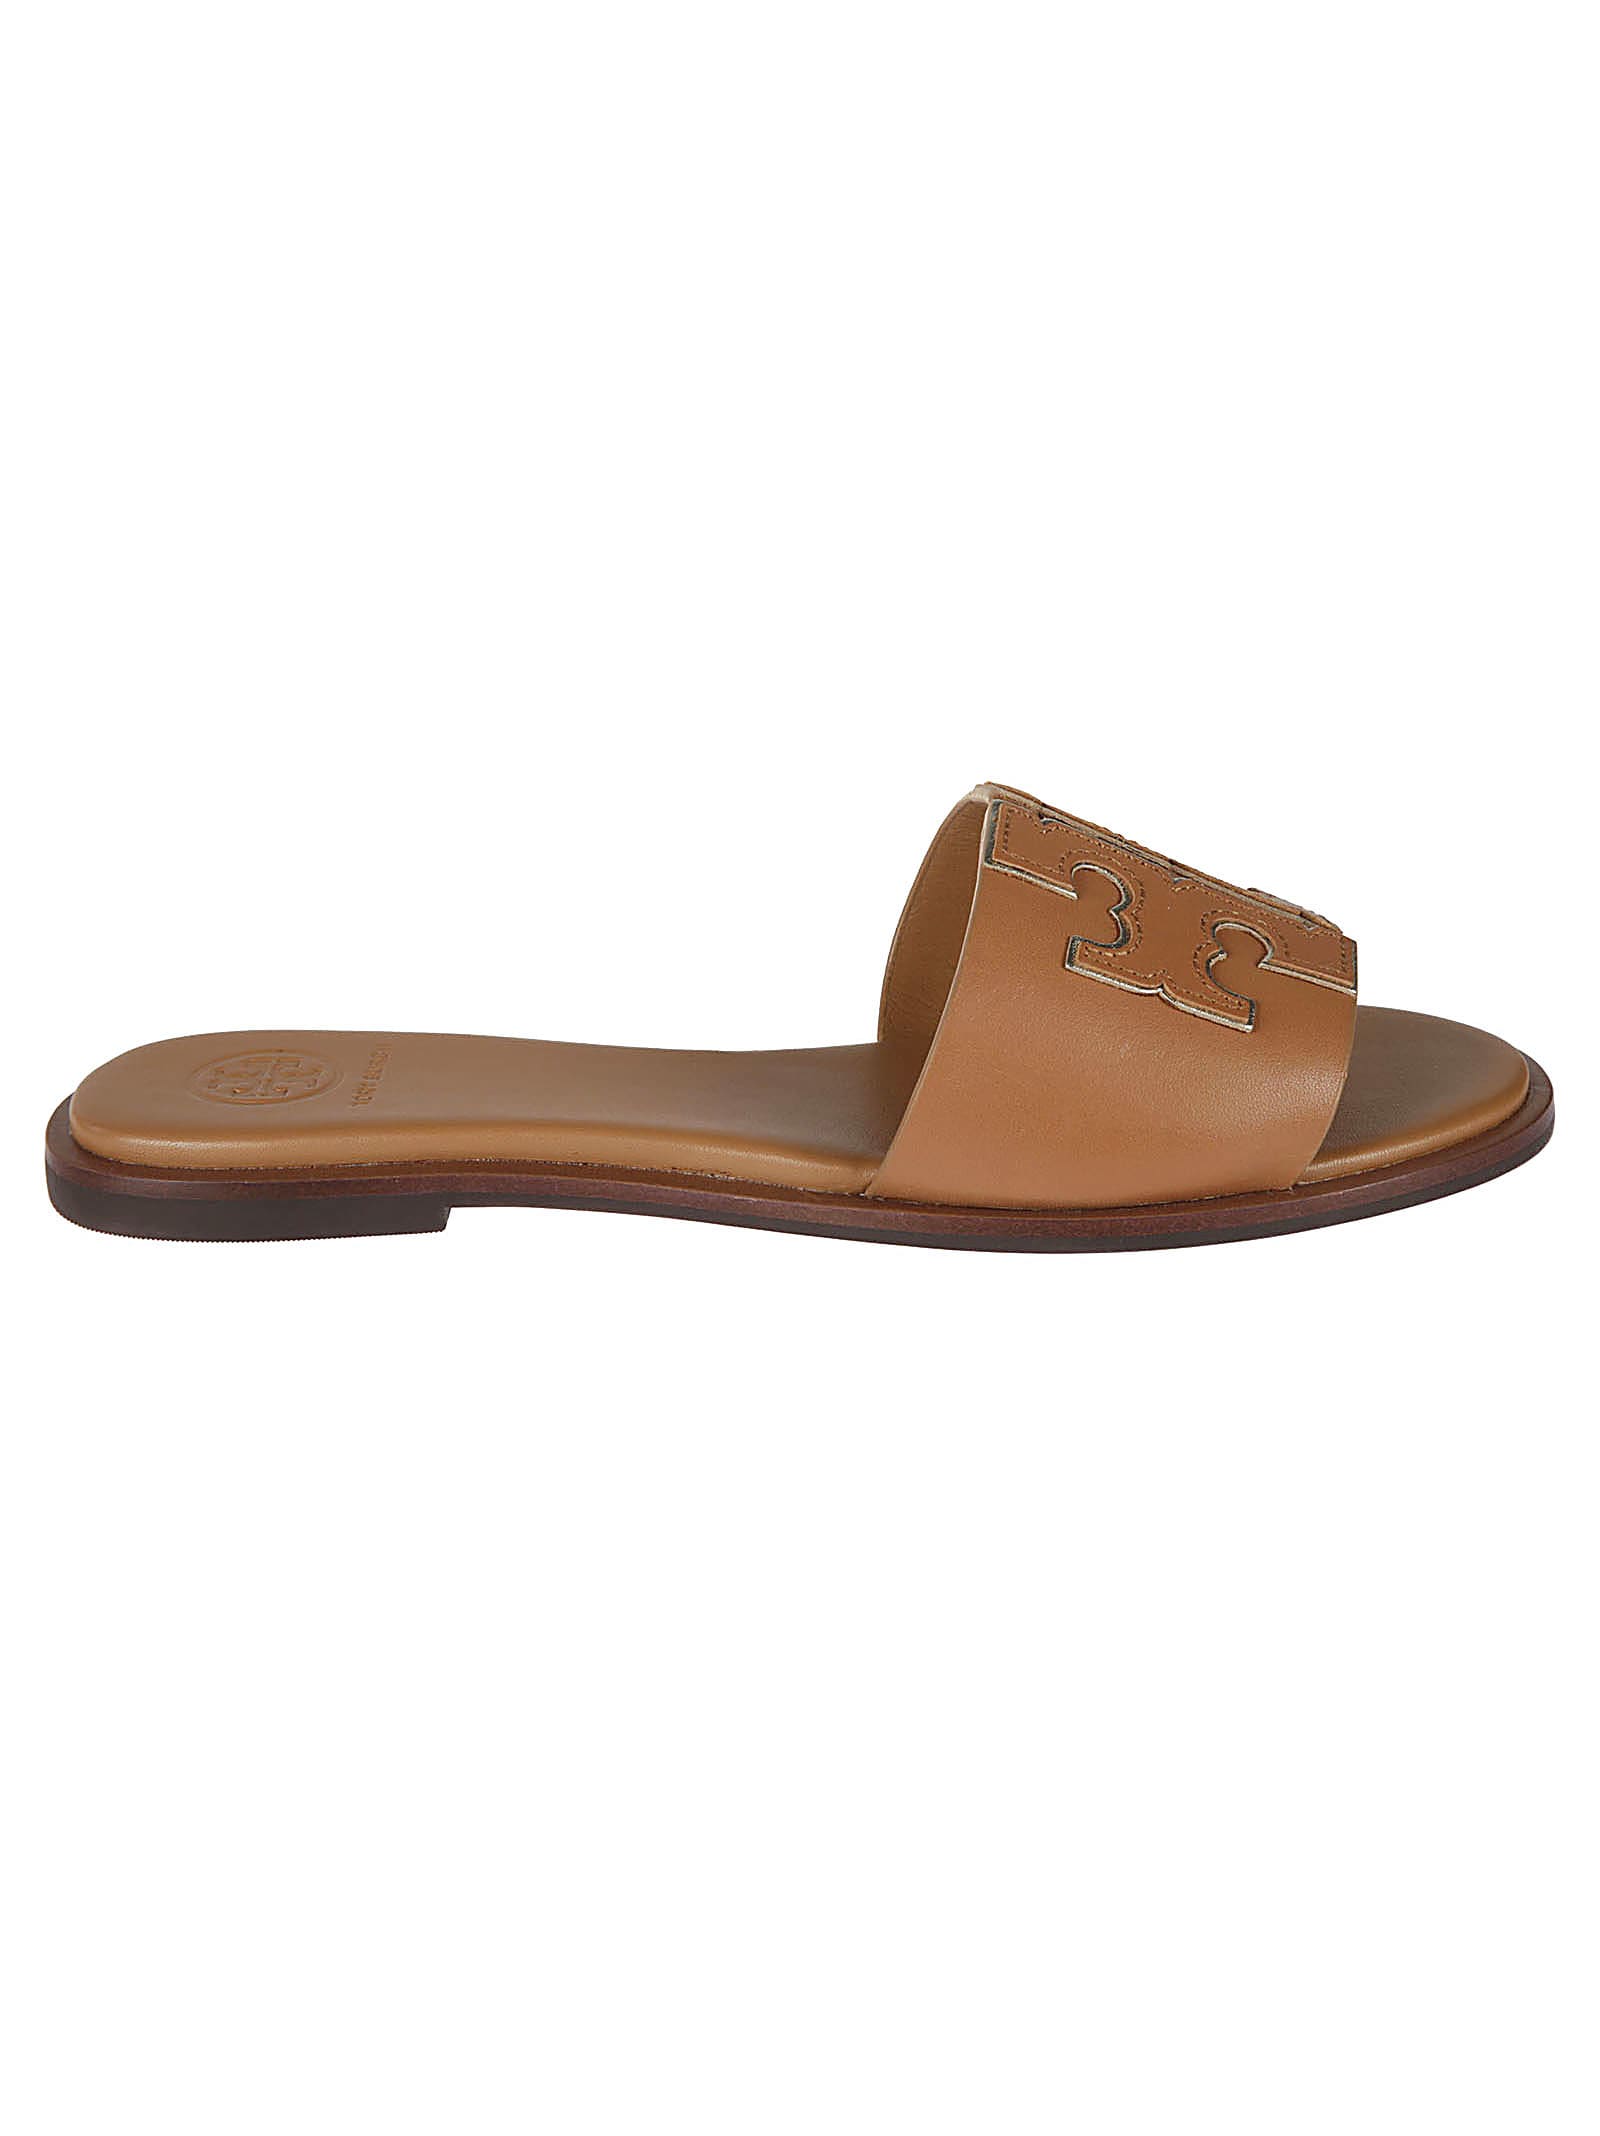 Buy Tory Burch Ines Sliders online, shop Tory Burch shoes with free shipping